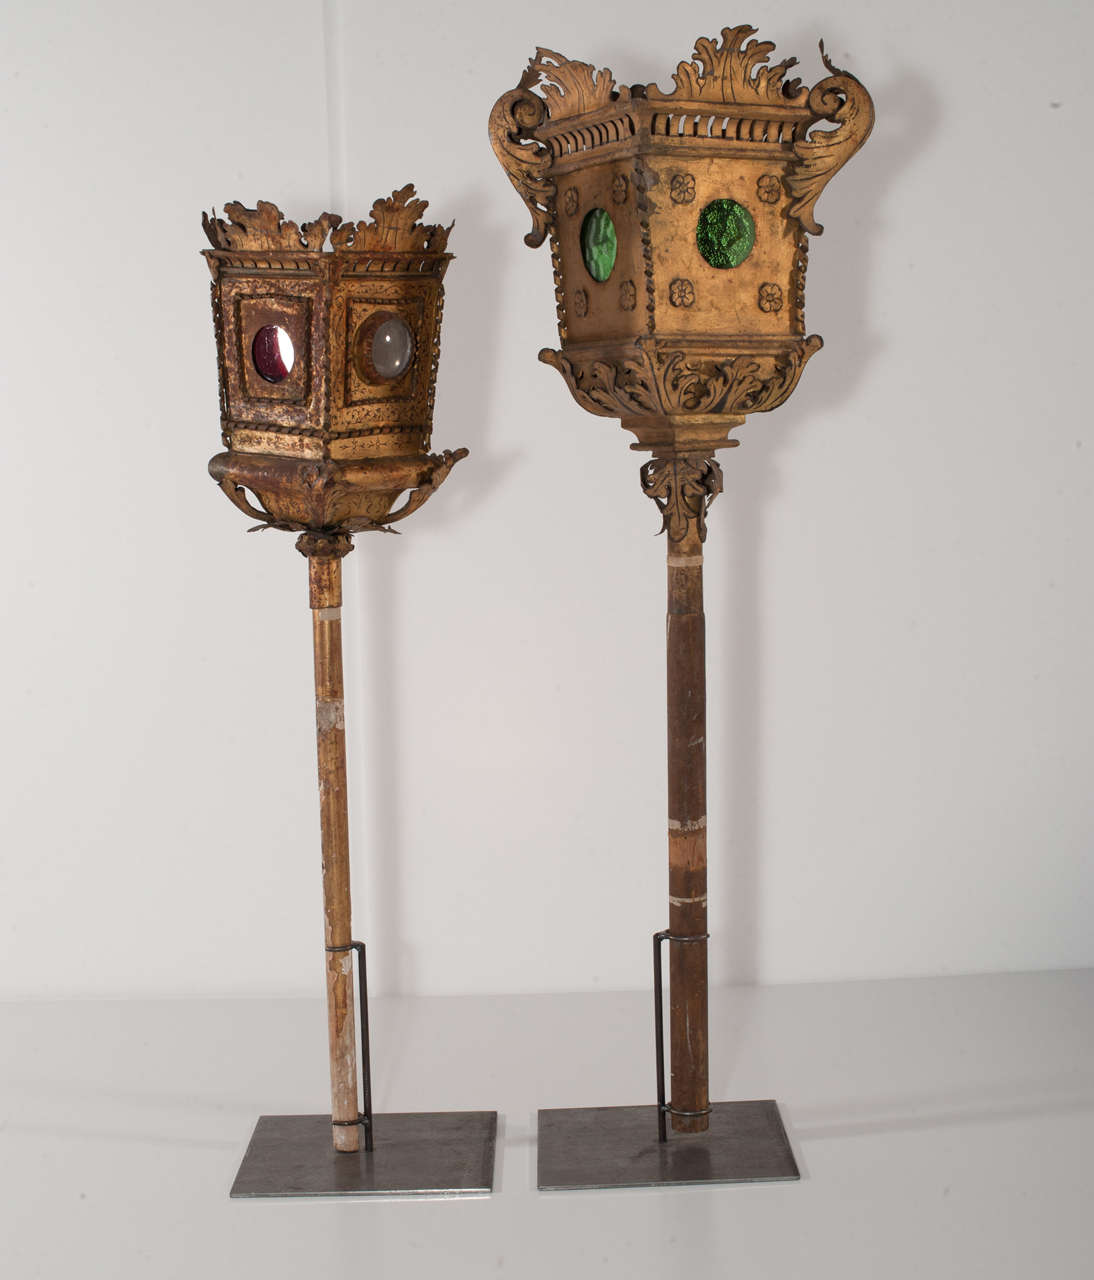 18th century pair of golden plate lanterns mounted on an iron base.

Measures: lantern with green glasses height 90cm, diameter 25cm; lantern with red glasses height 75cm, diameter 18cm.